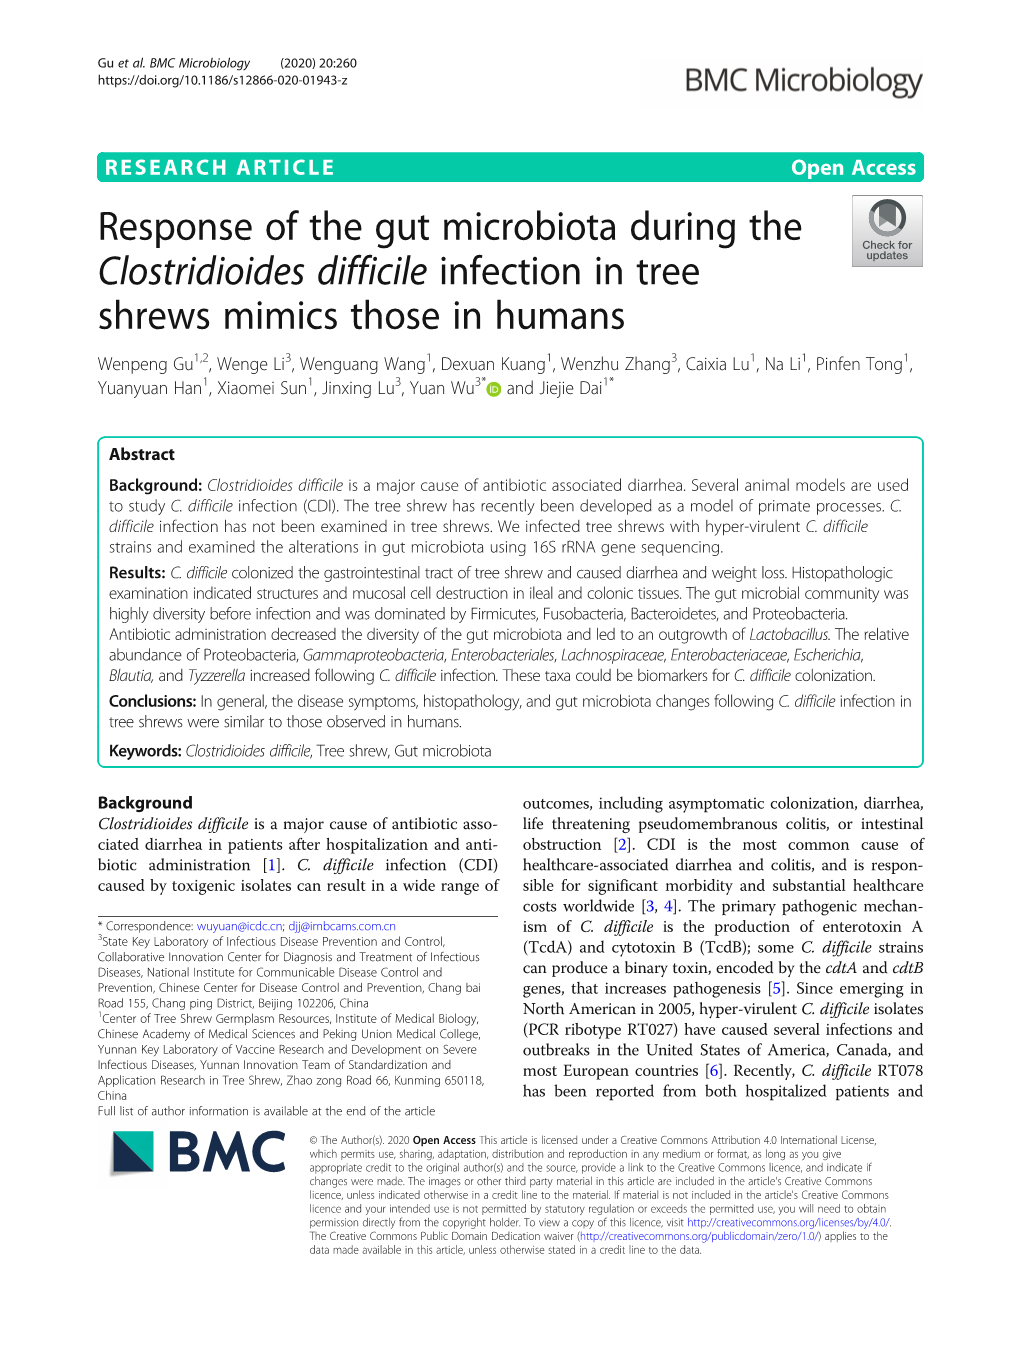 Response of the Gut Microbiota During the Clostridioides Difficile Infection